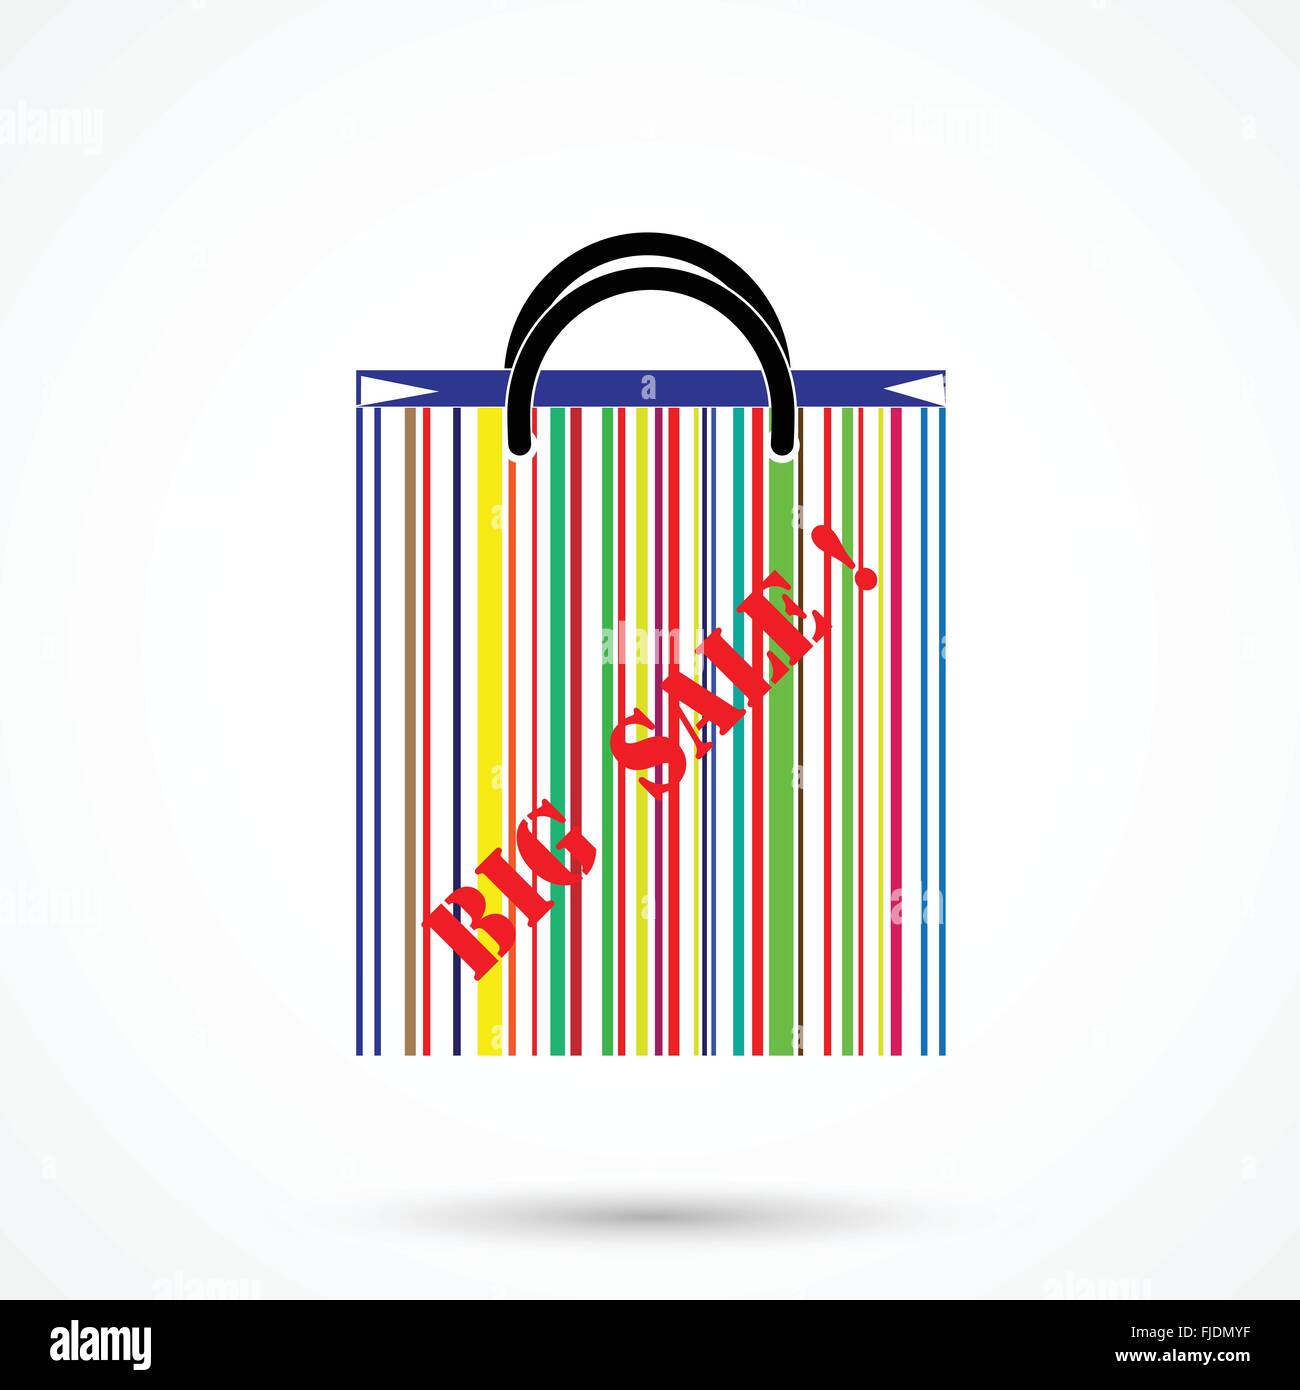 Creative abstract shopping bag logo design with barcode symbol. Sale icon,discount,promotion,sell concept.Vector illustration. Stock Vector